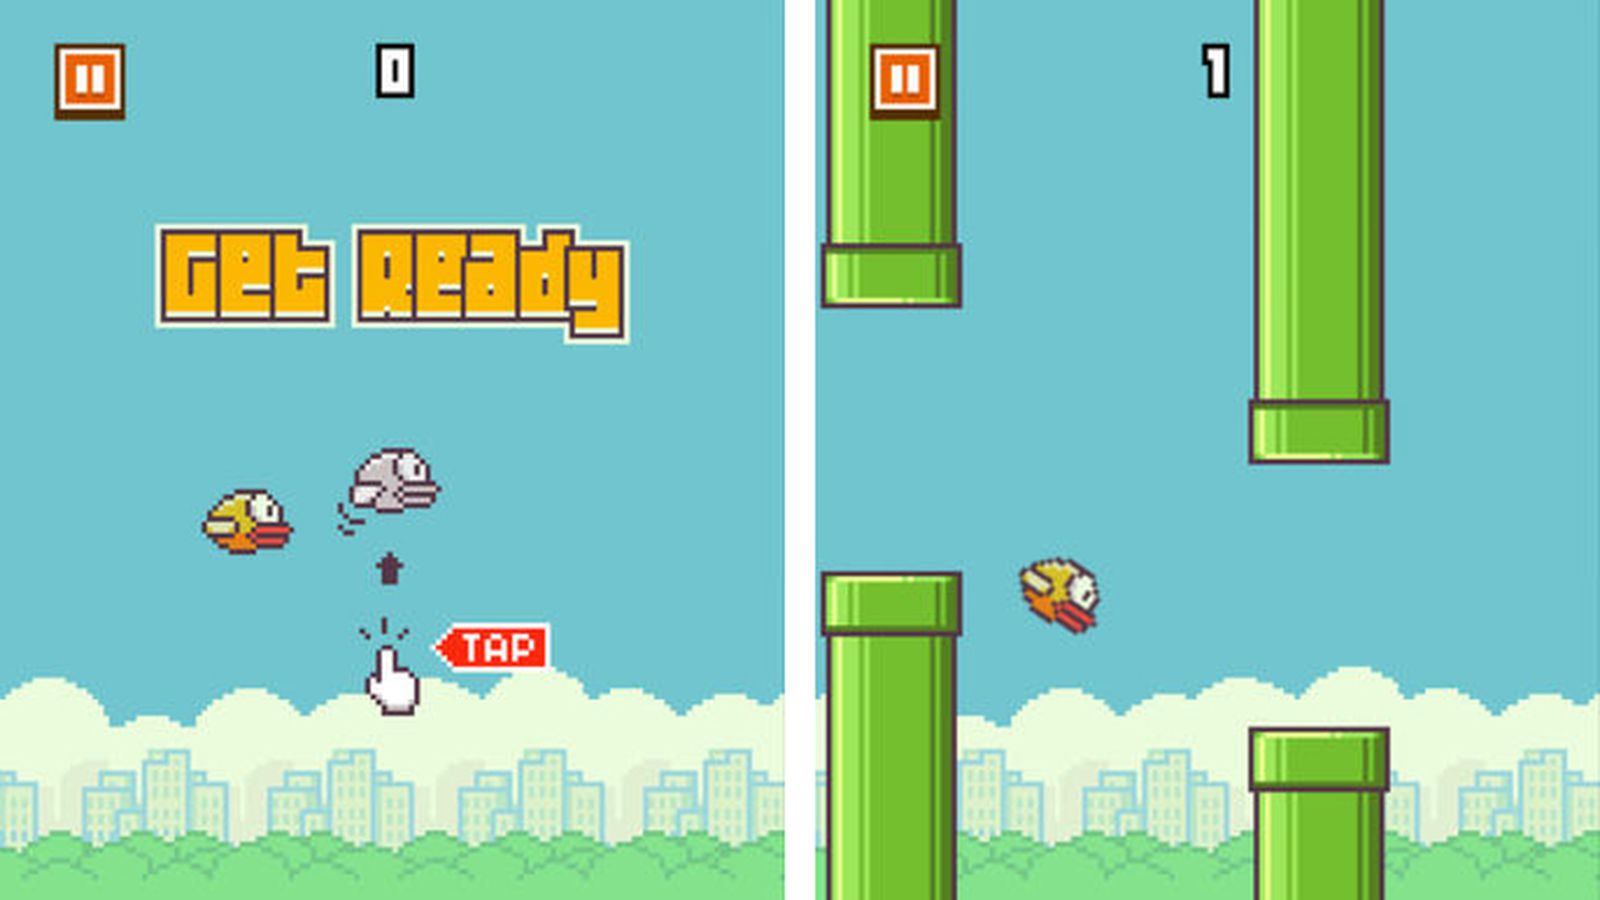 Video: Flappy Bird's final levels, The Independent